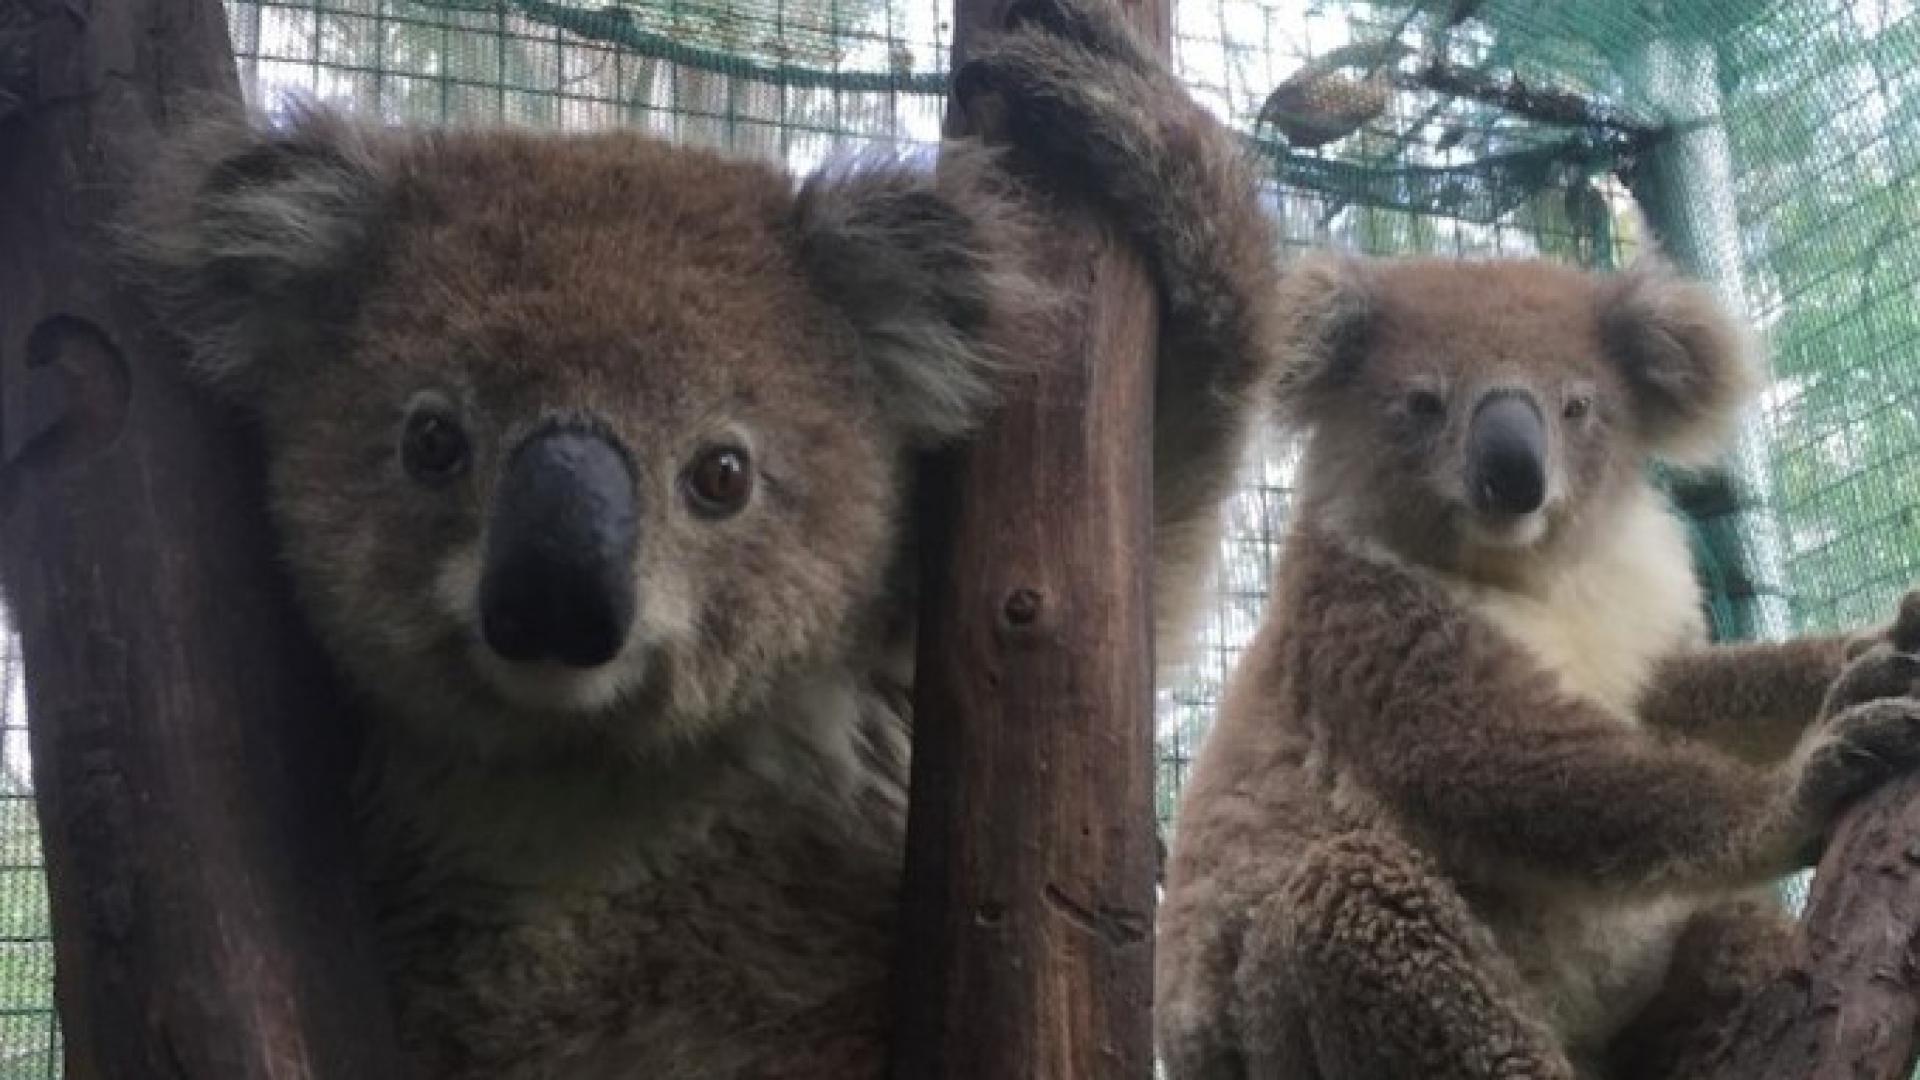 Image of Kurra and Marine, two koalas which survived the impact of the 2019-20 'Black Summer' bushfires.